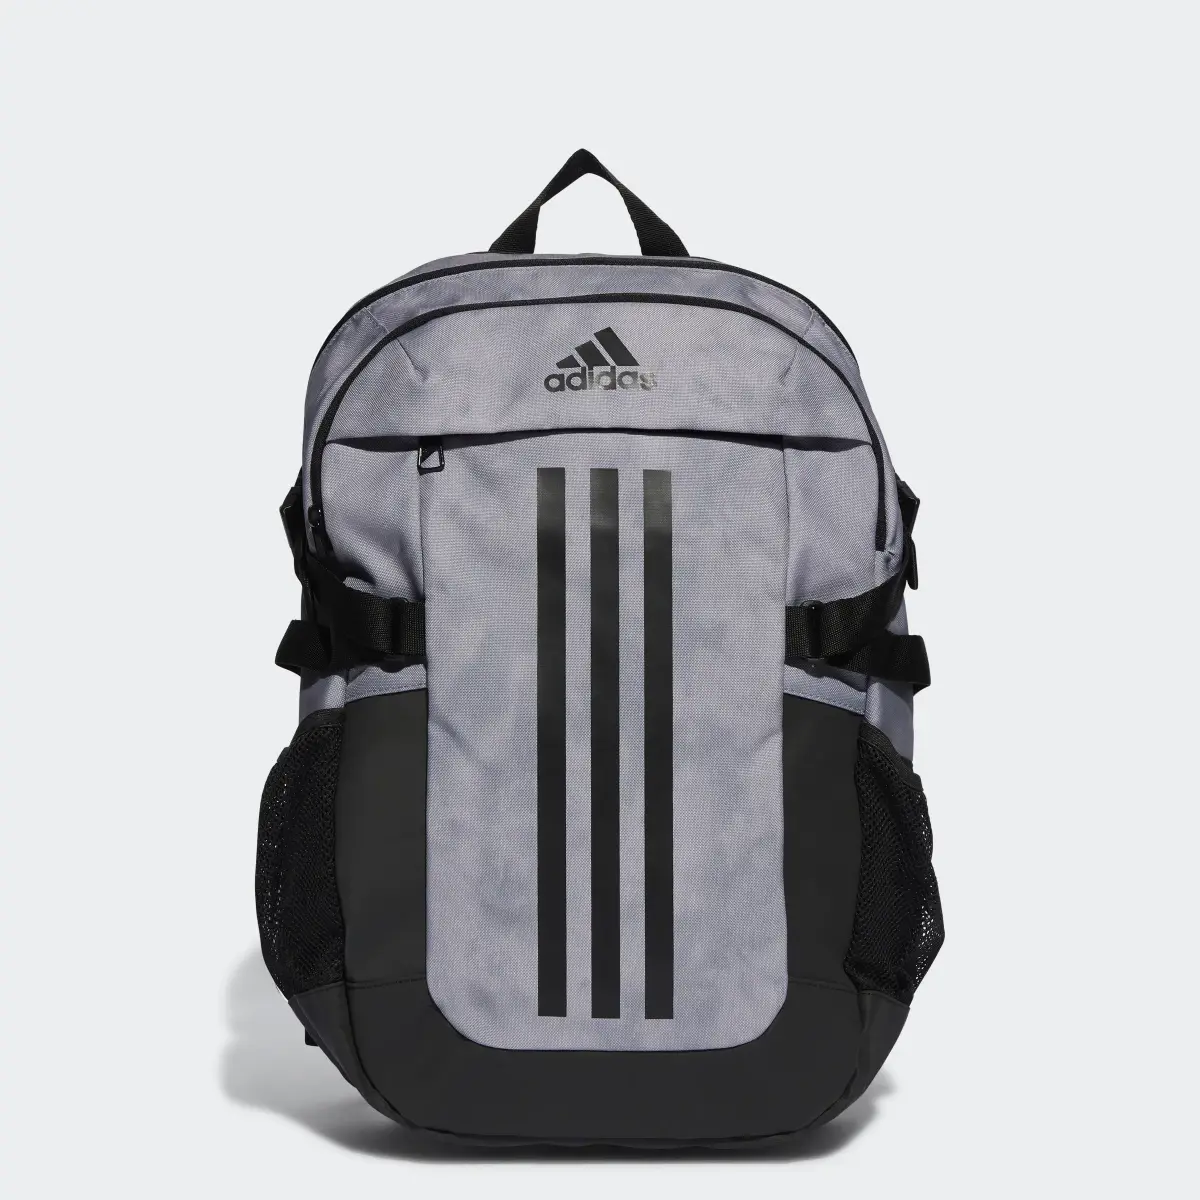 Adidas Power 6 Graphic Backpack. 1